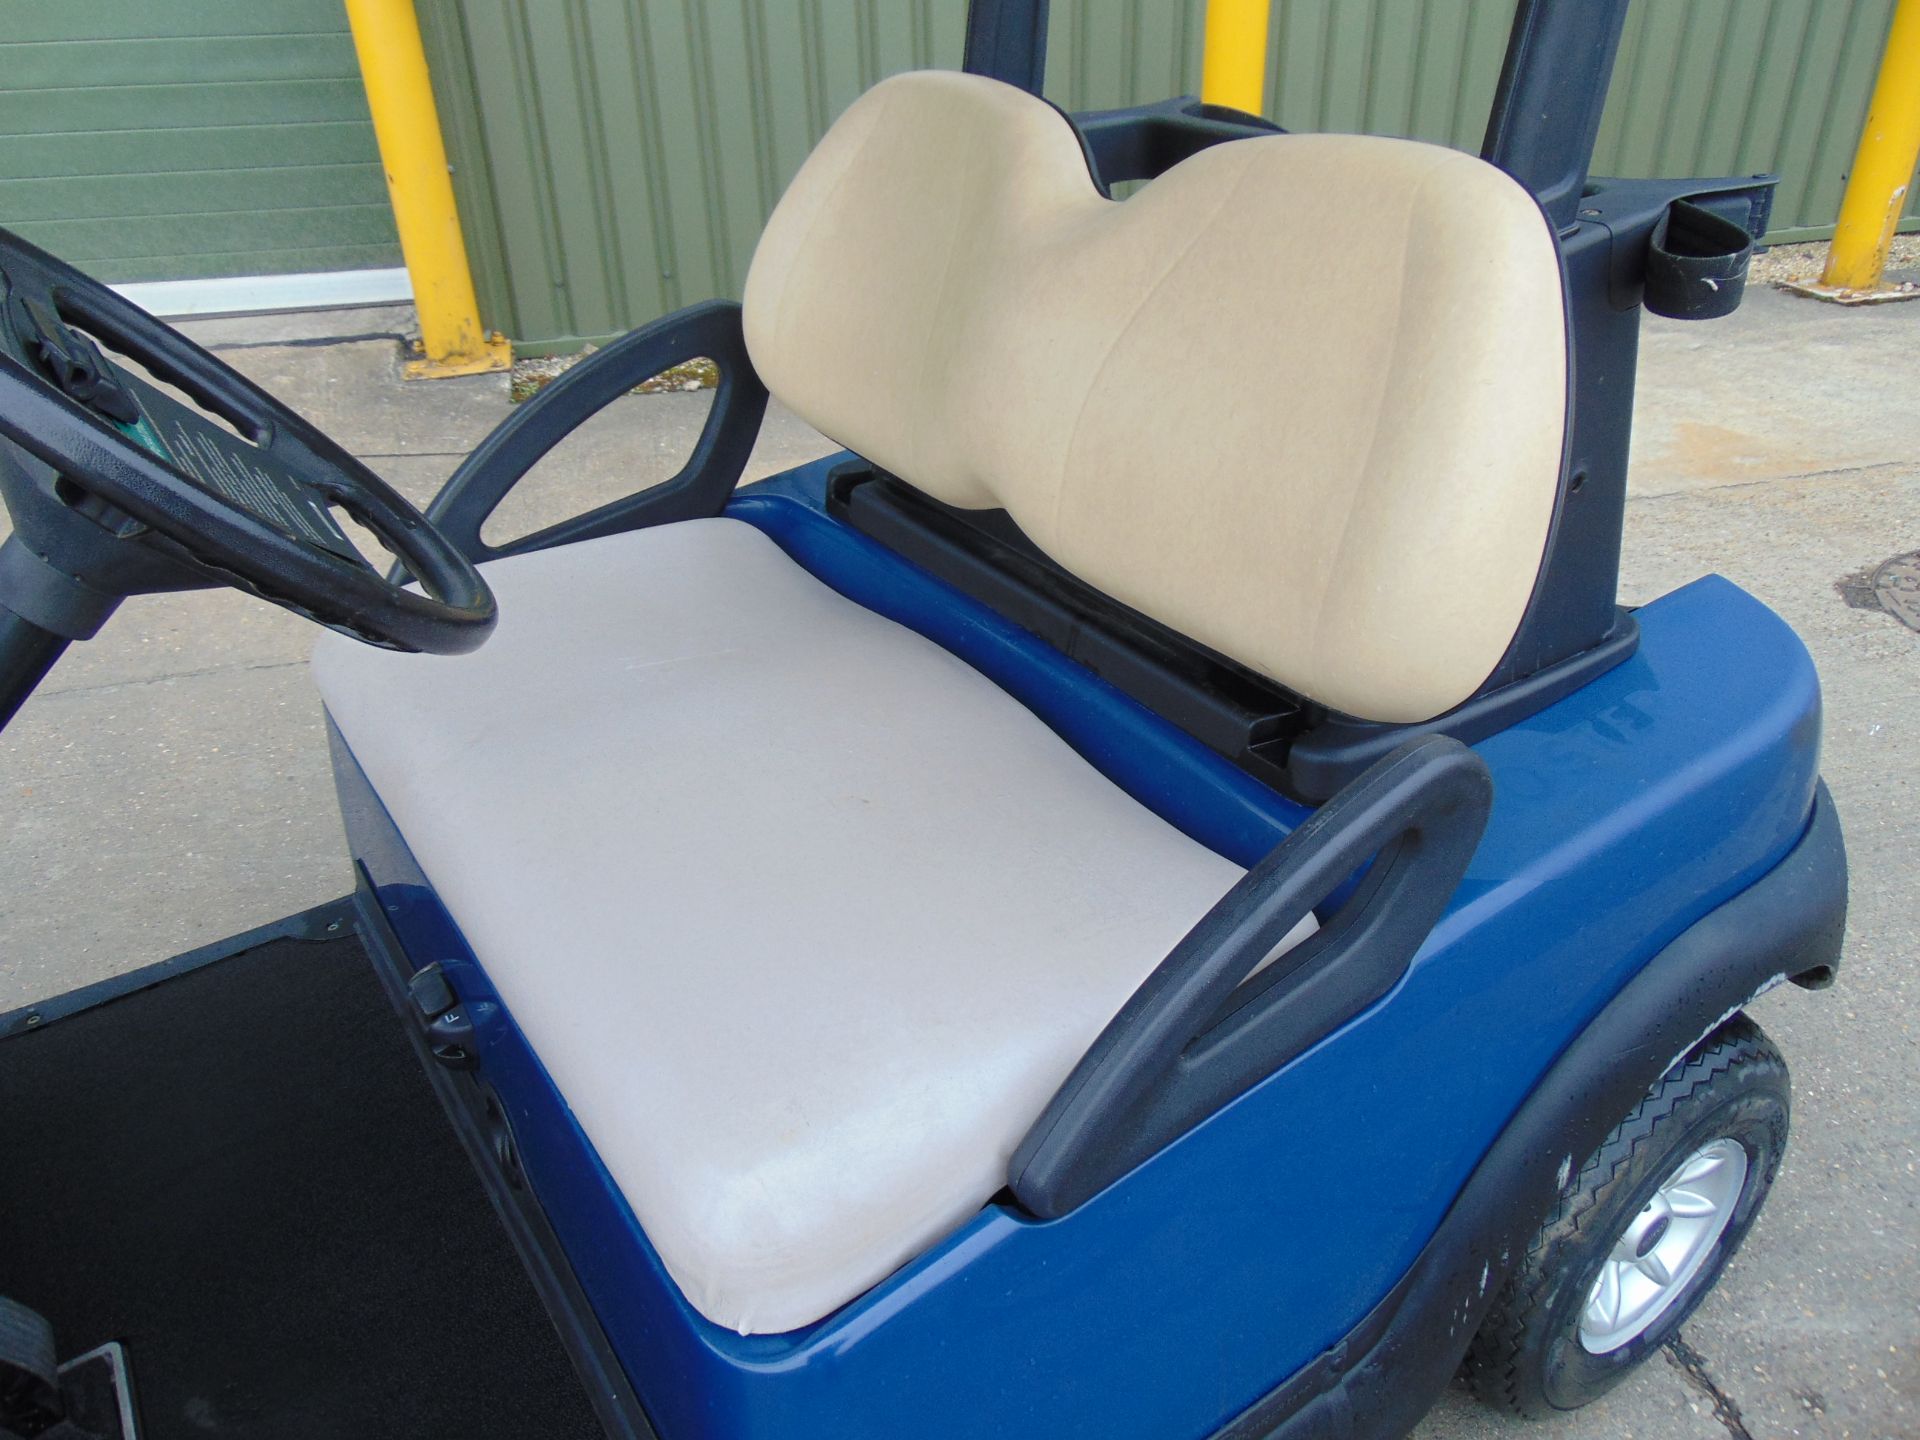 Club Car Precedent Electric Golf Buggy C/W Battery Charger - Image 10 of 16